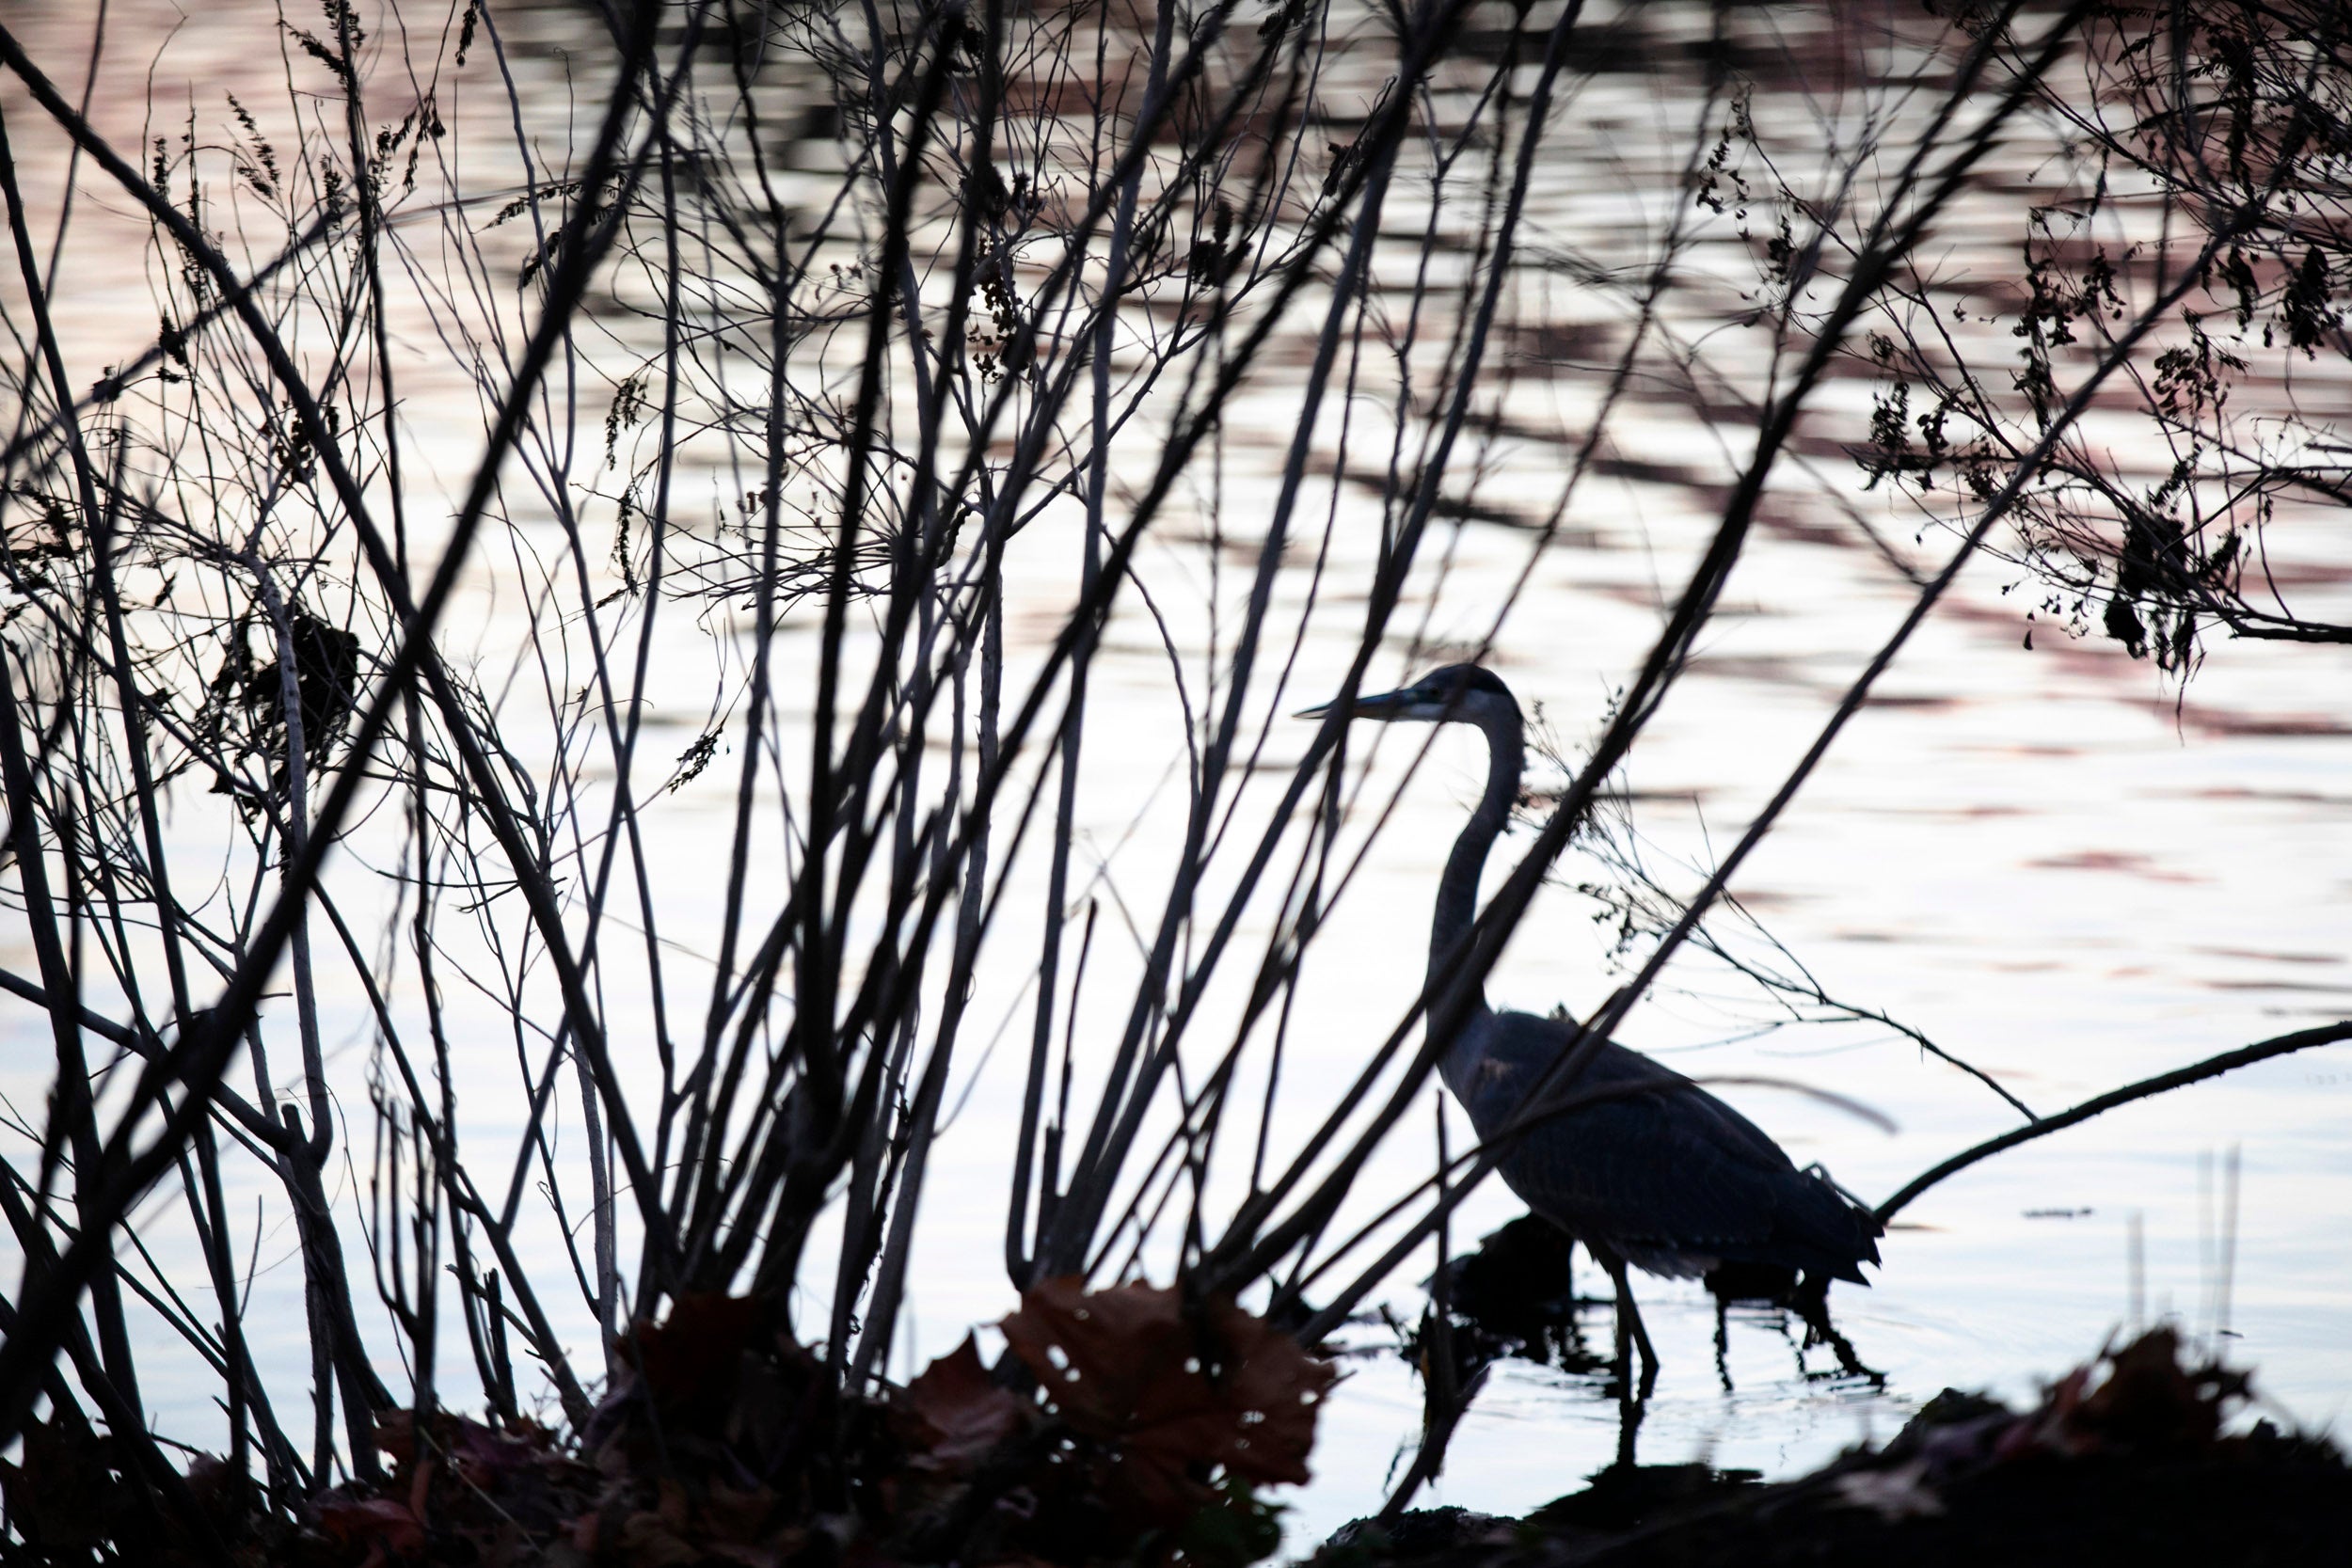 A heron searches for its morning snack at dawn.